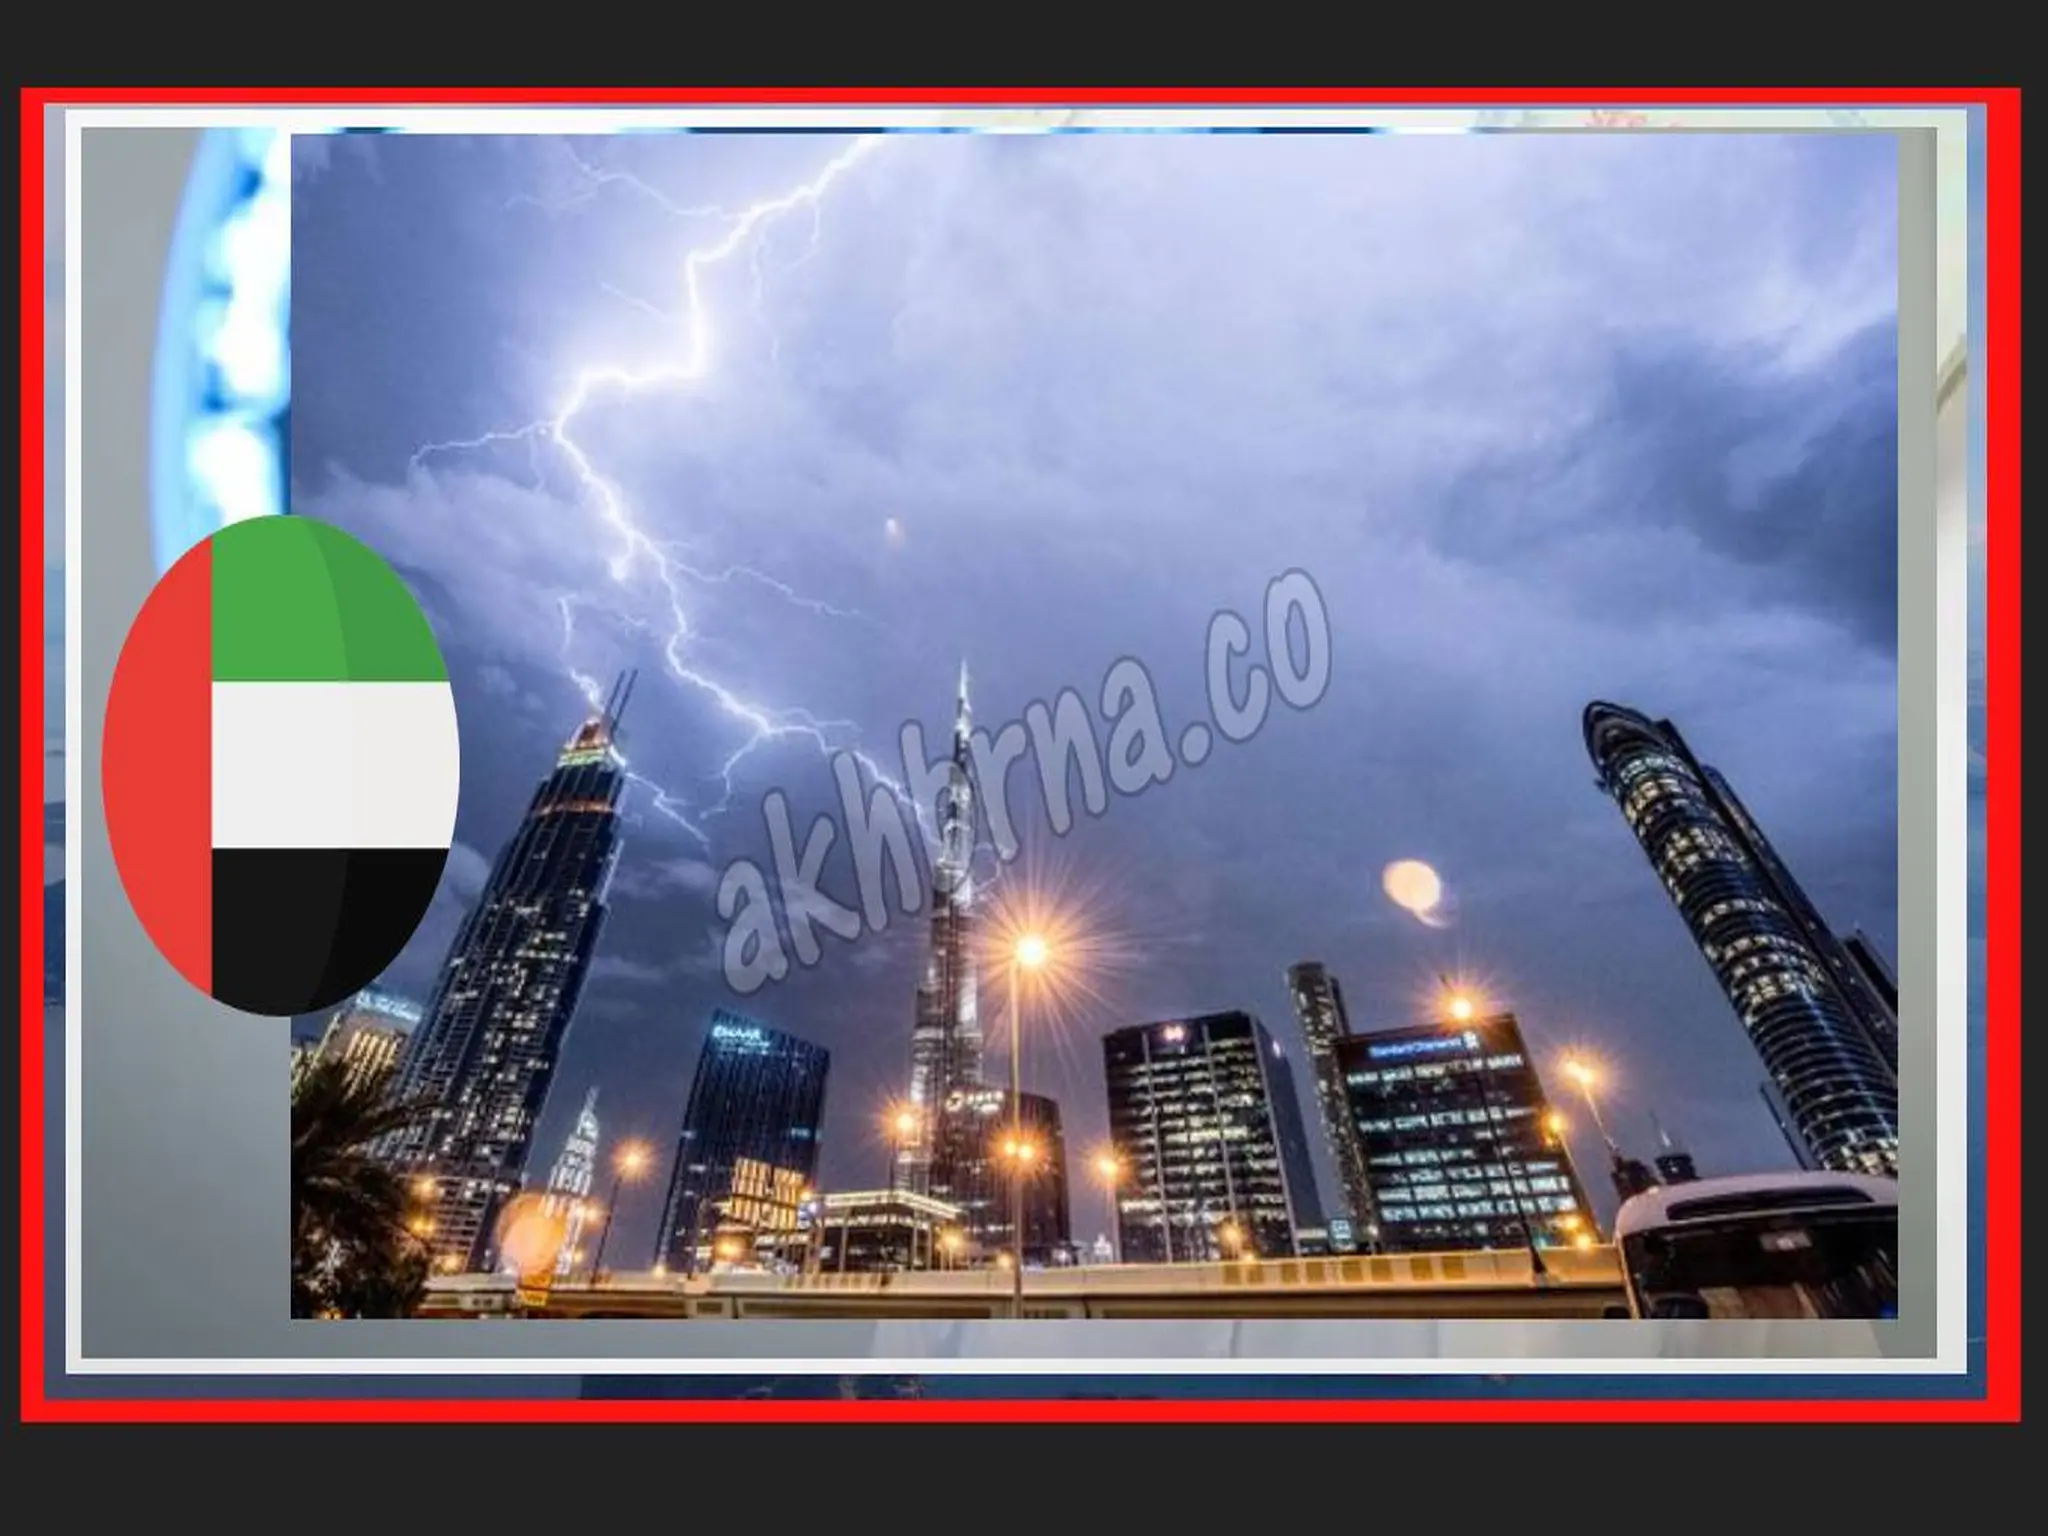 The UAE warns residents and citizens of a thunderstorm and bad weather in several areas